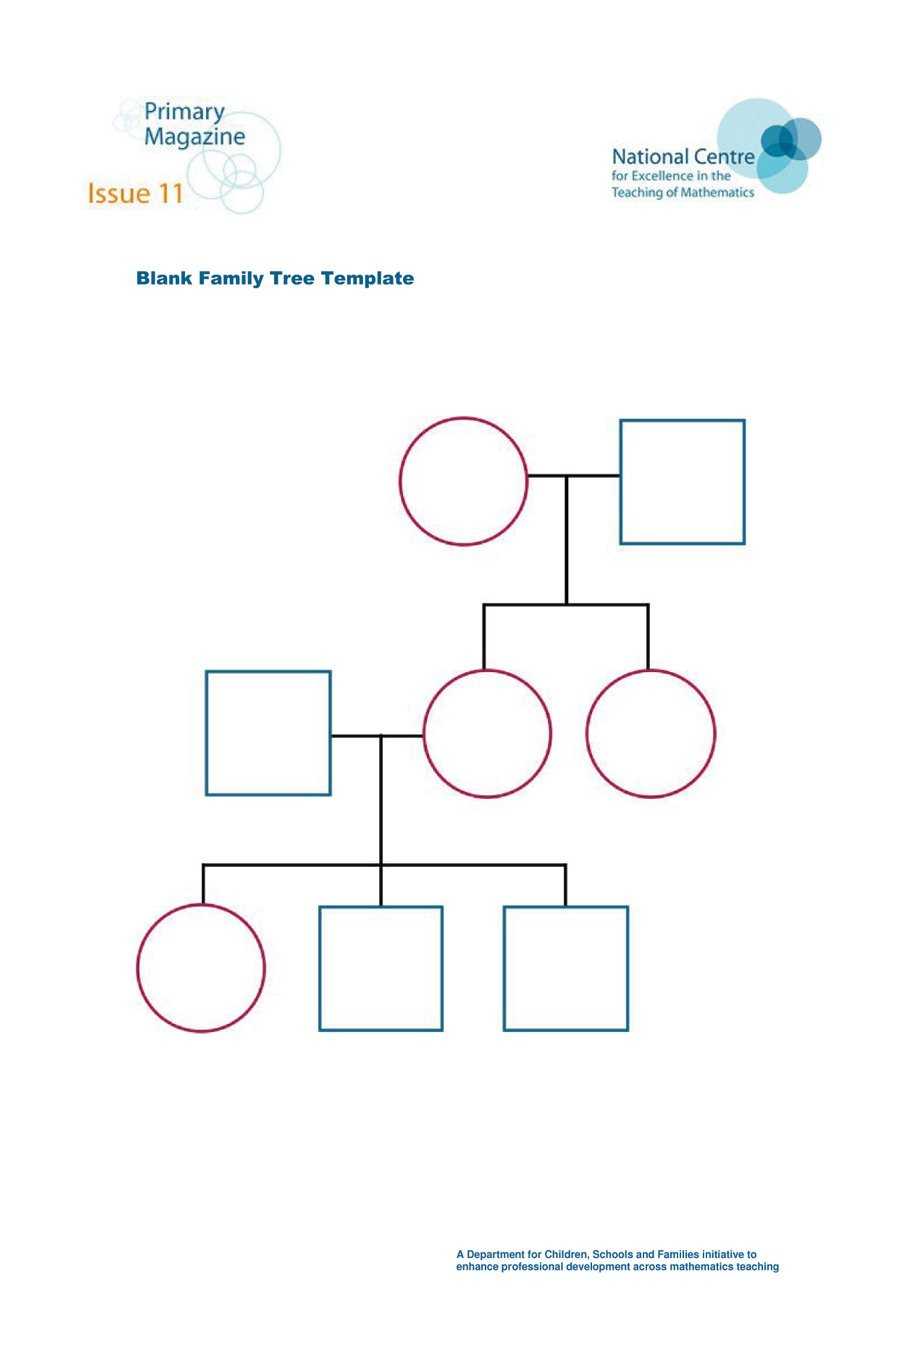 50+ Free Family Tree Templates (Word, Excel, Pdf) ᐅ Within Blank Family Tree Template 3 Generations